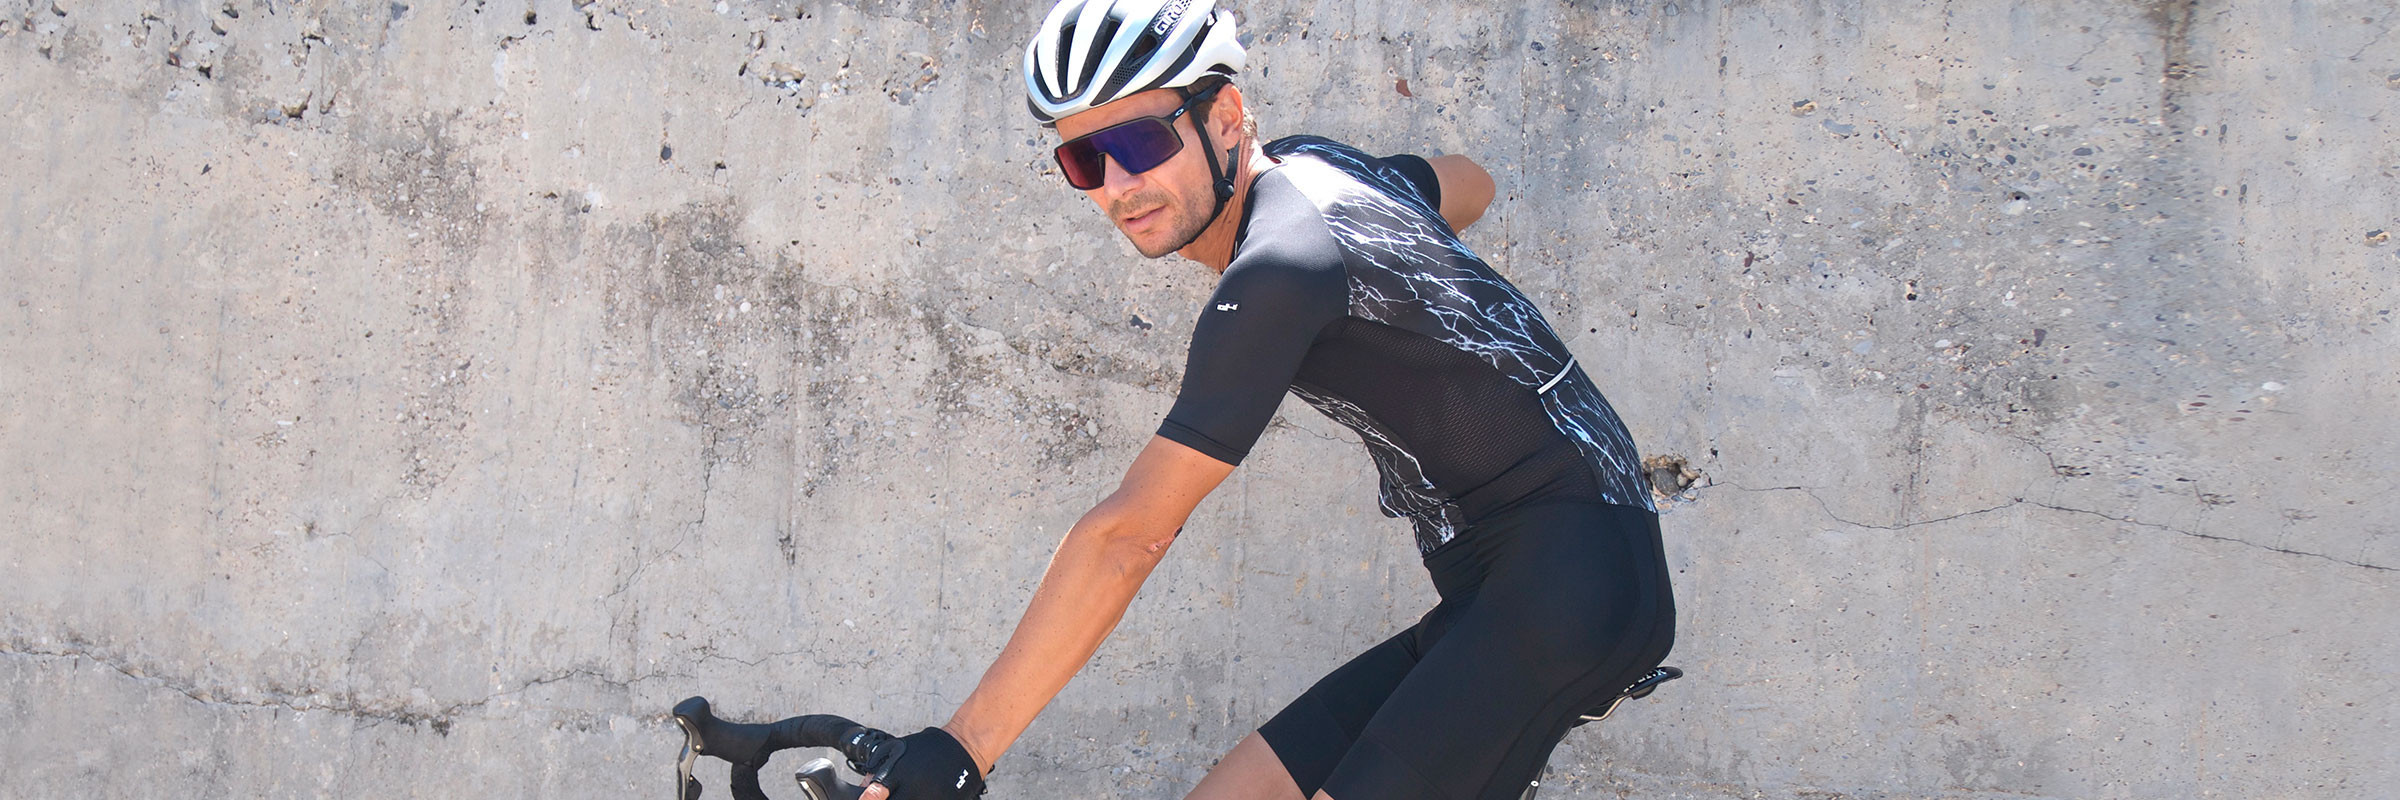 G4 Cycling Suit for Men |G4 Dimension